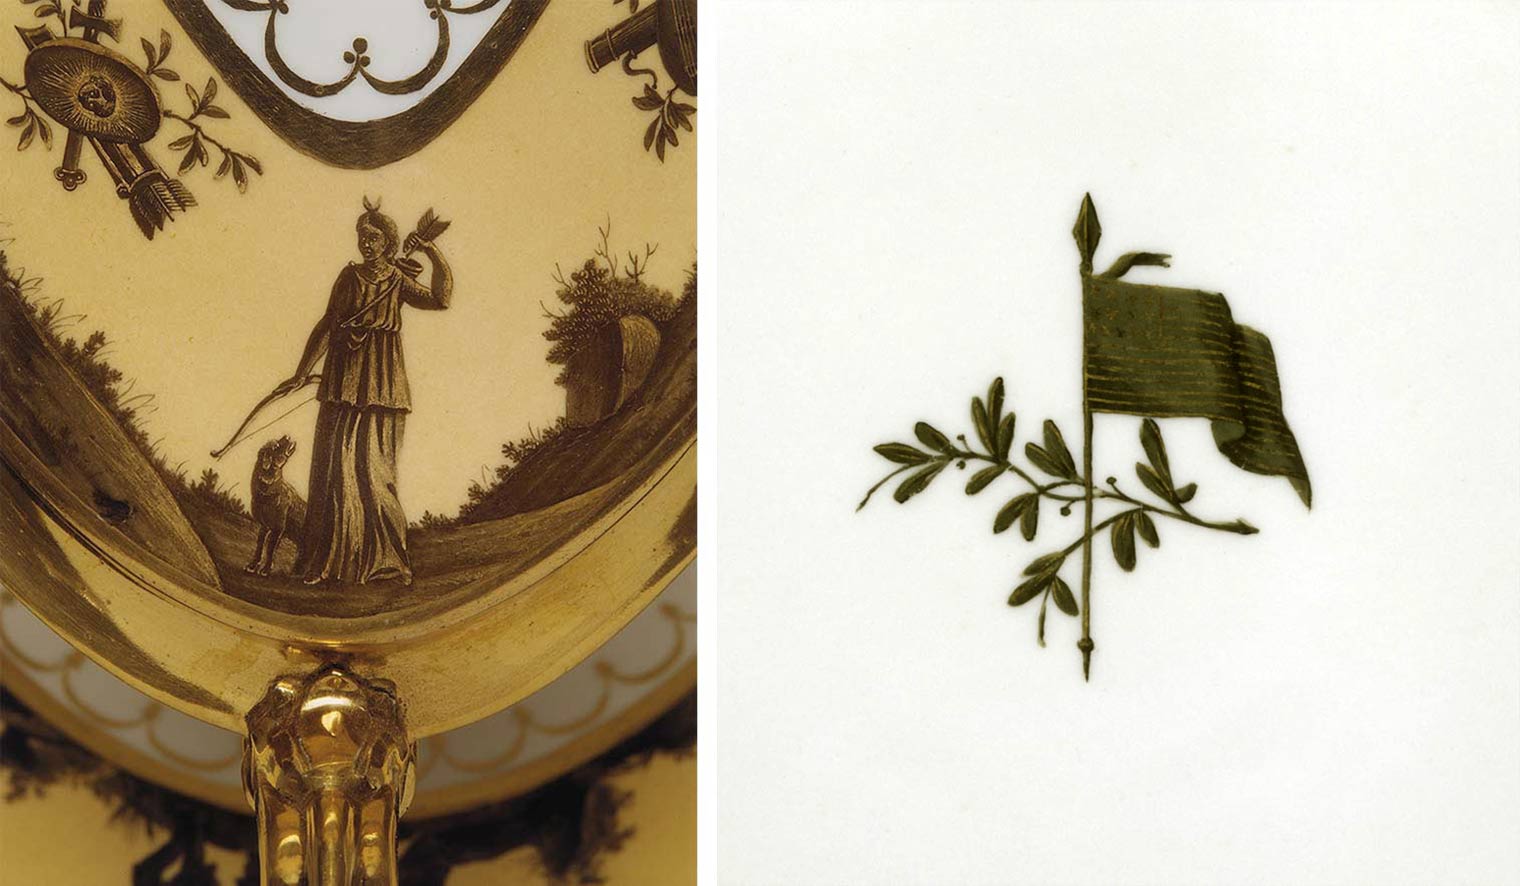 Composite image. On left, a detail from a porcelain tureen depicting an Indigenous woman with a bow and arrow and a dog at her feet. On right, a detail from a porcelain plate depicting an American flag with a branch